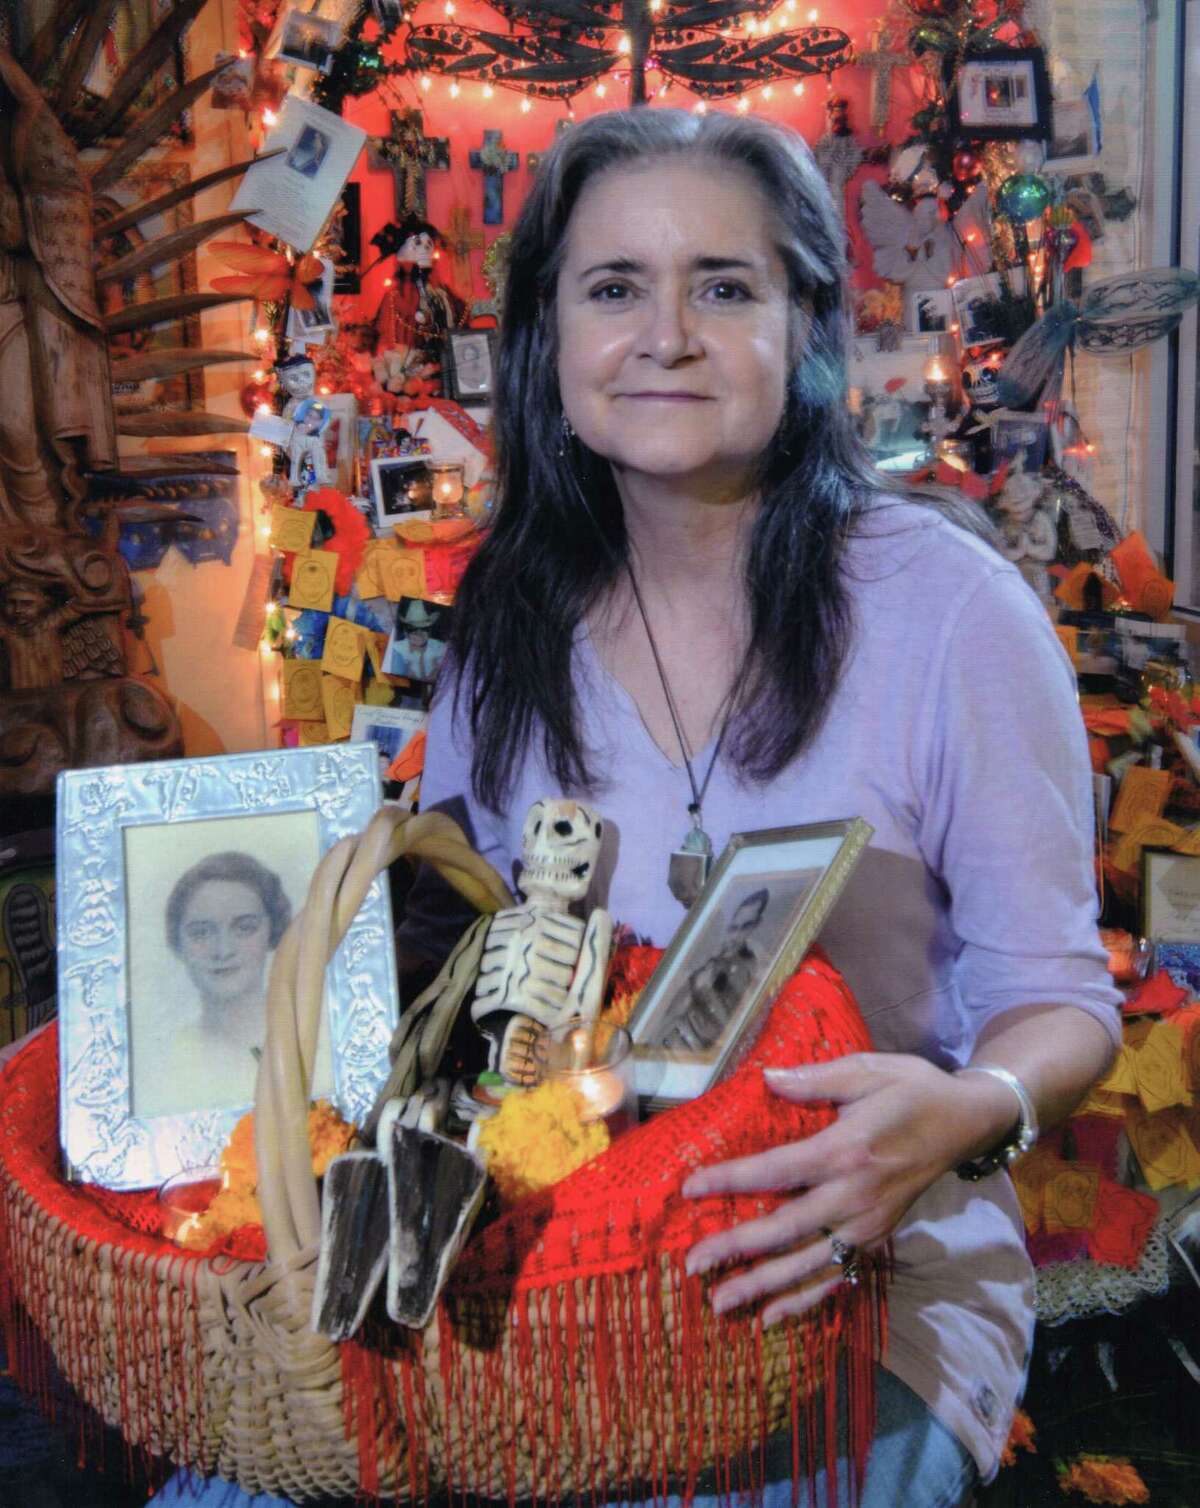 Mary Cerruti poses with a tribute she created for her parents as part of the annual Day of the Dead celebration at Casa Ramirez, a store where she occasionally worked. The store owners estimate the photo was taken around 2010. The basket contains images of her parents, a wood folk art skeleton, marigolds and small candles.